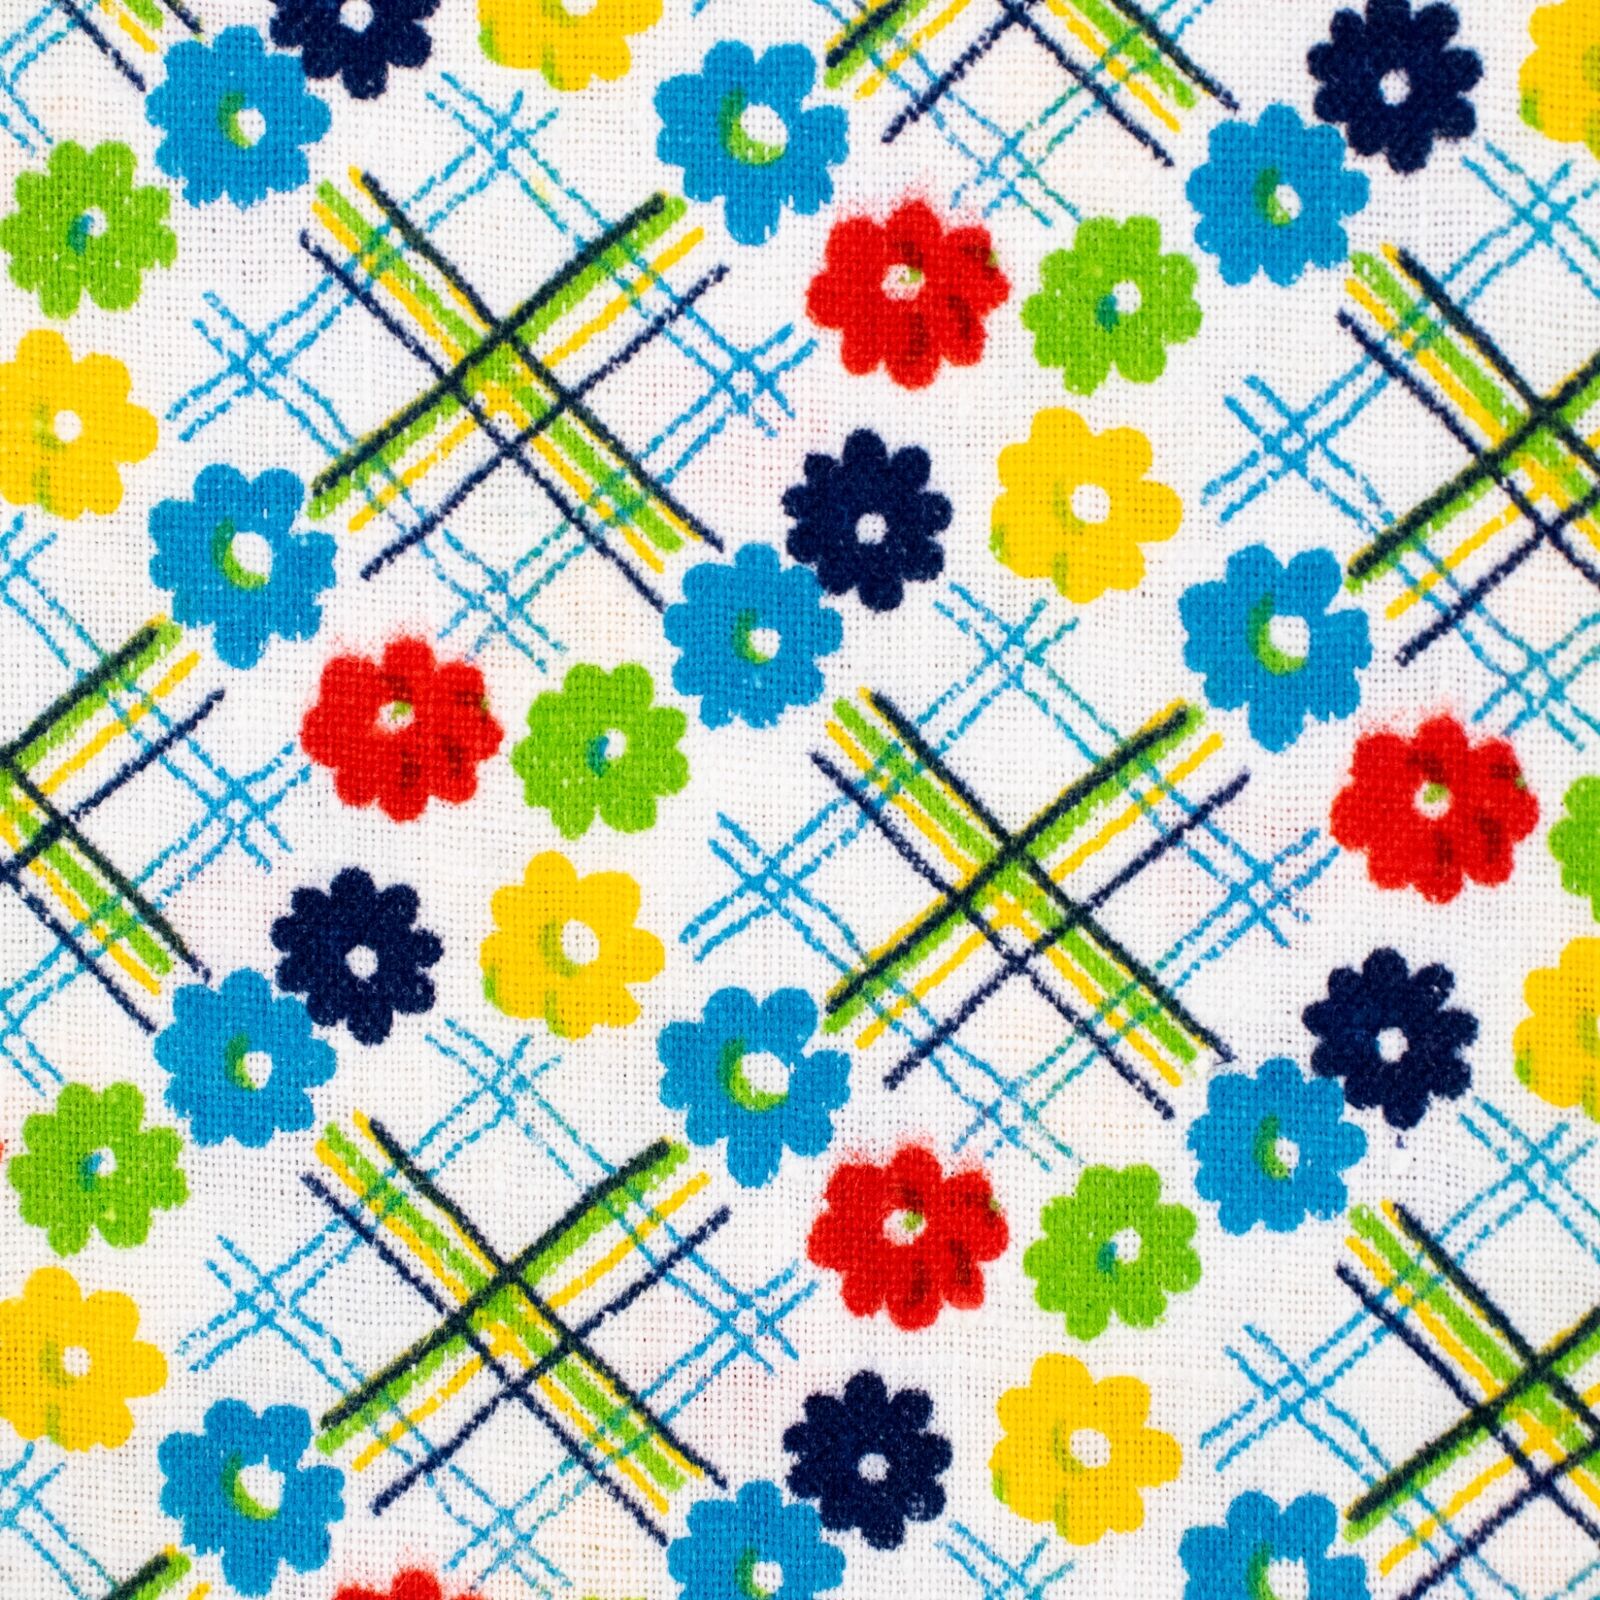 Vintage Cotton Quilting Fabric Floral Gingham Primary Colors 1940s 1950s BTHY